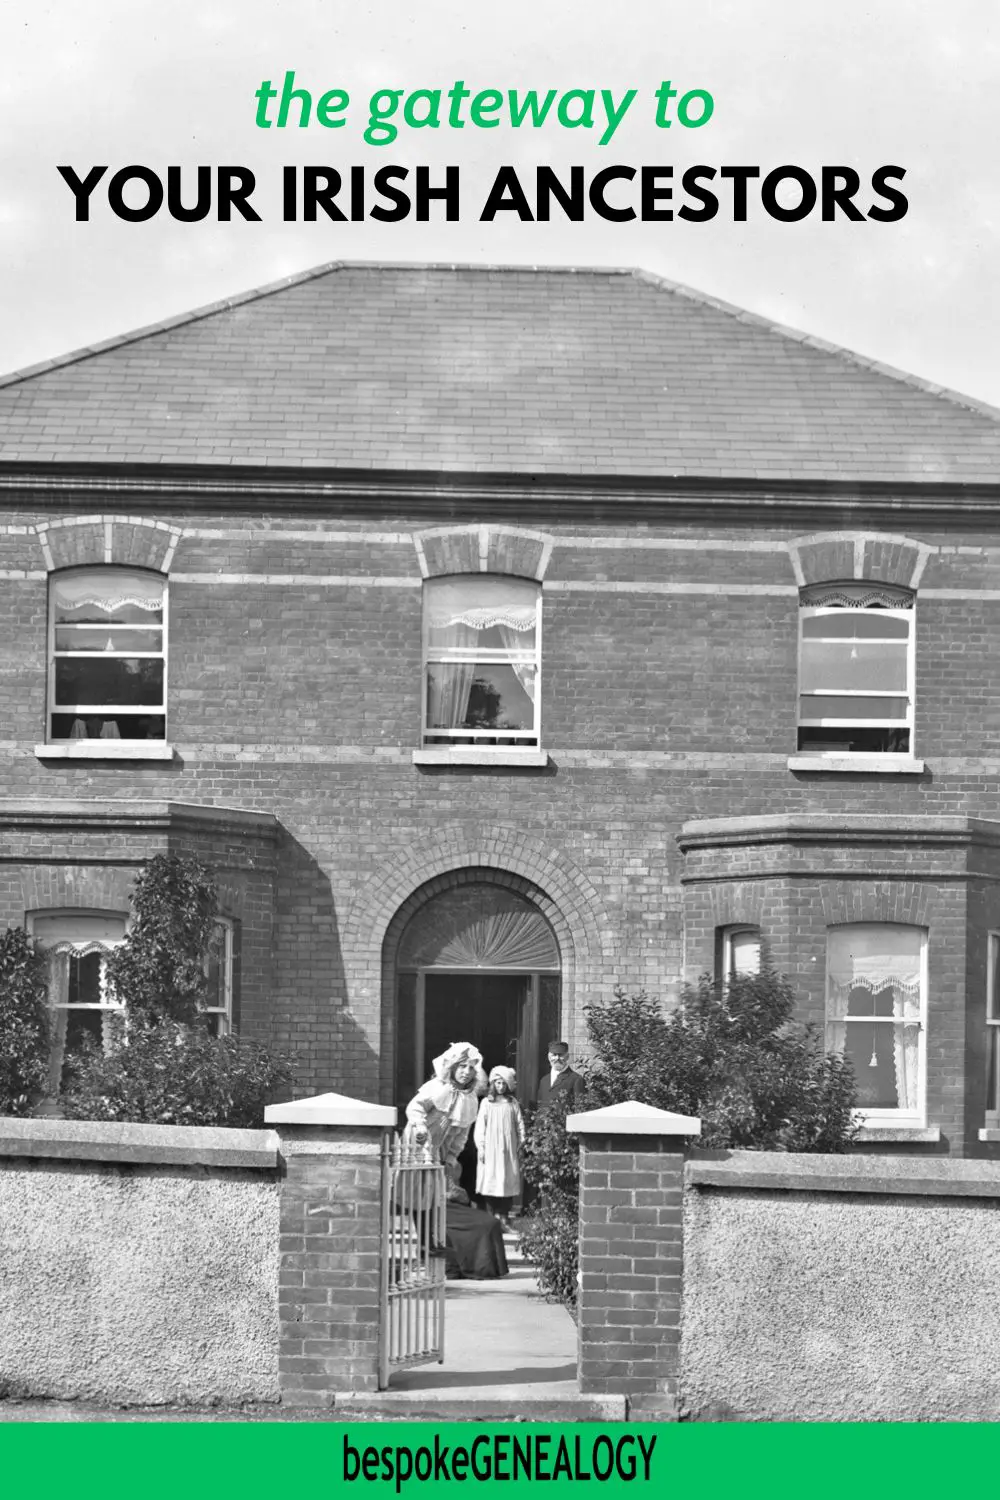 The Gateway to your Irish Ancestors. Old photo of an open gate leading to a house with a family standing outside the front door.